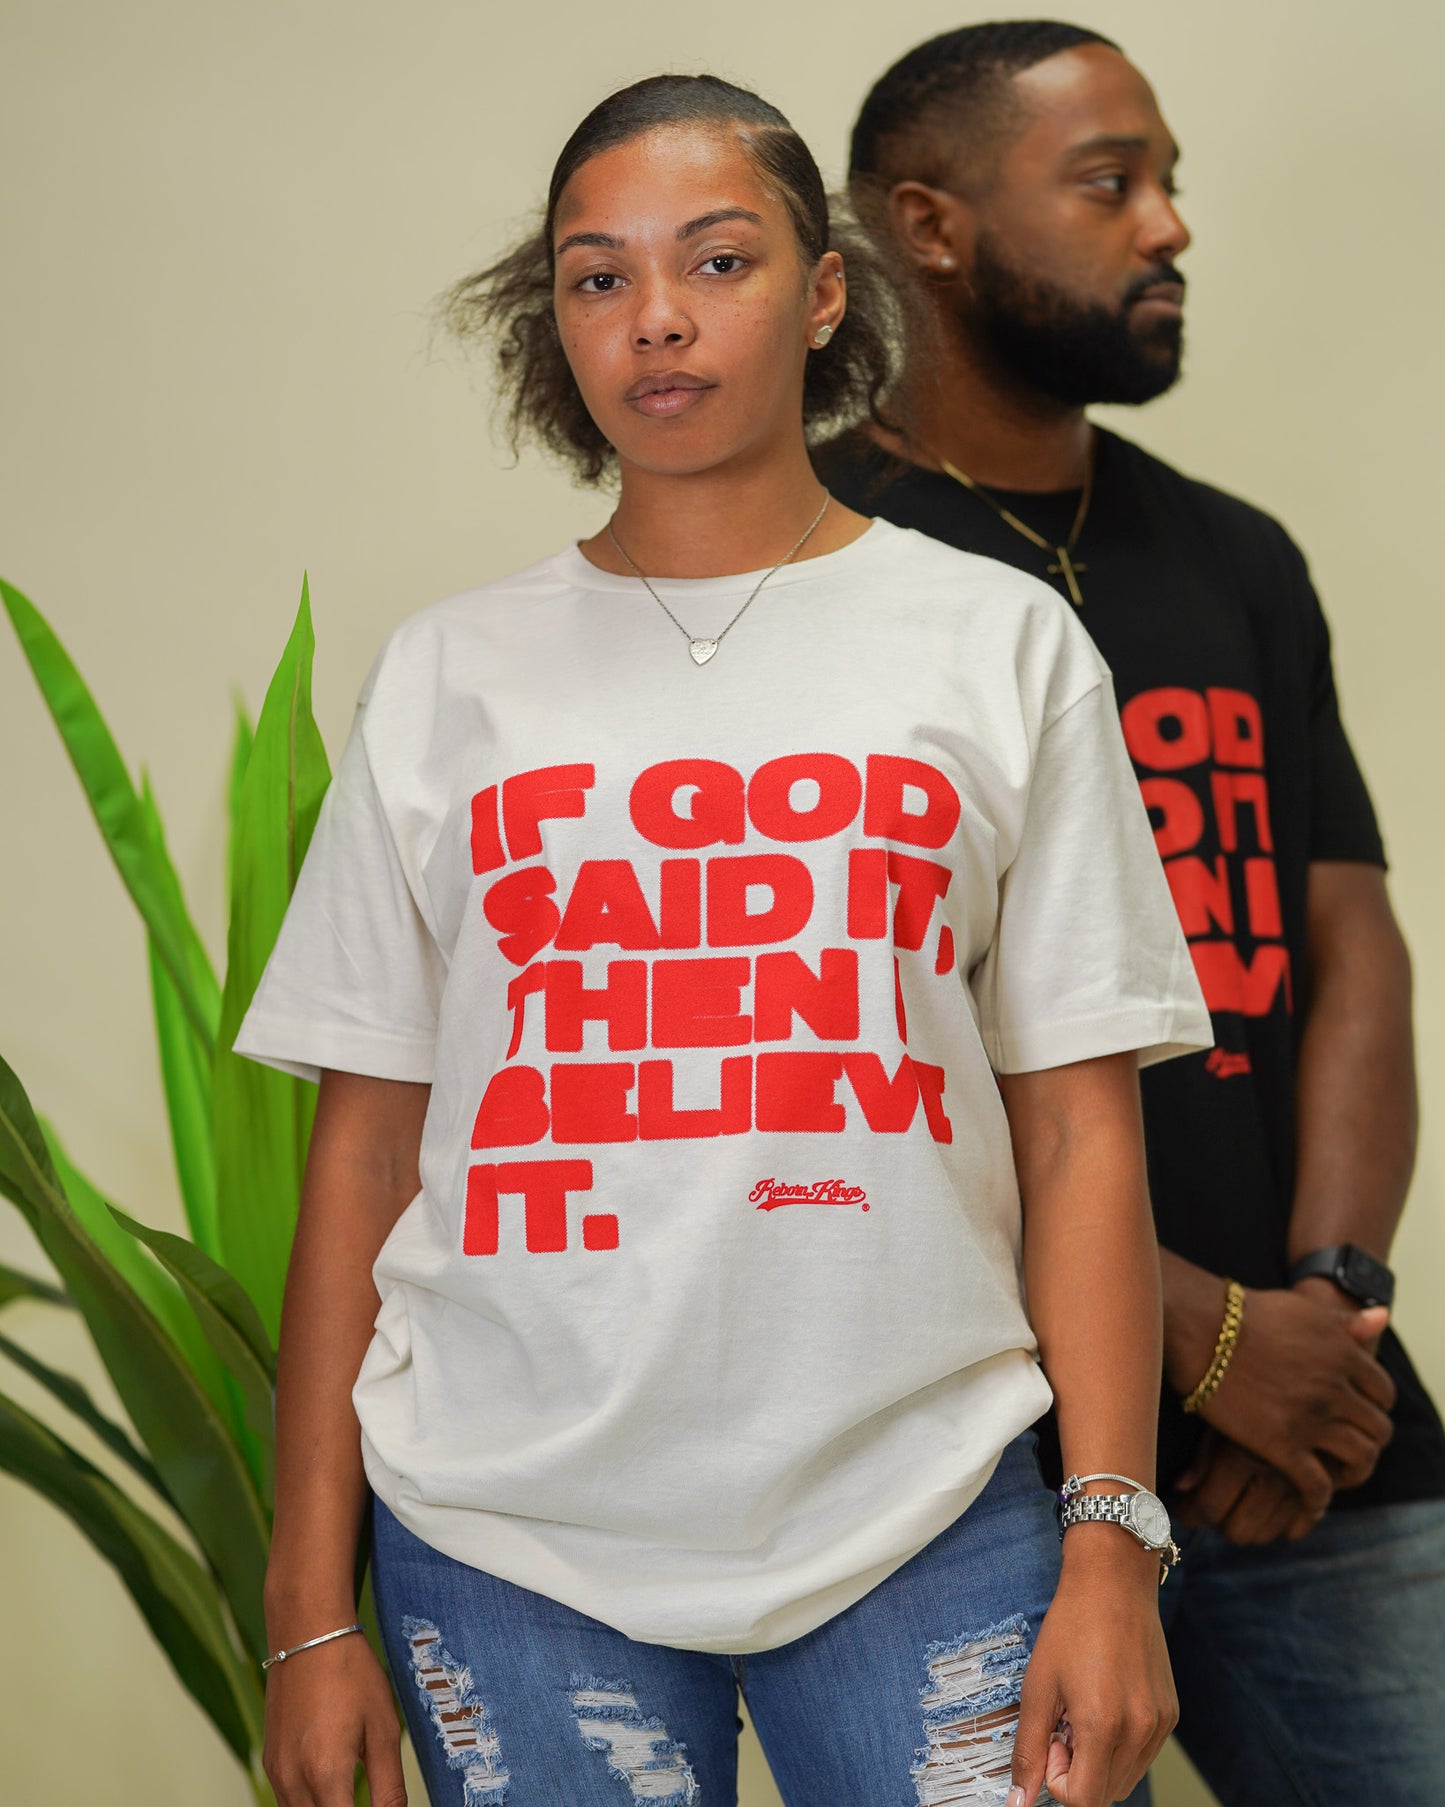 If God Said It, Then I Believe It Tee in Vintage White